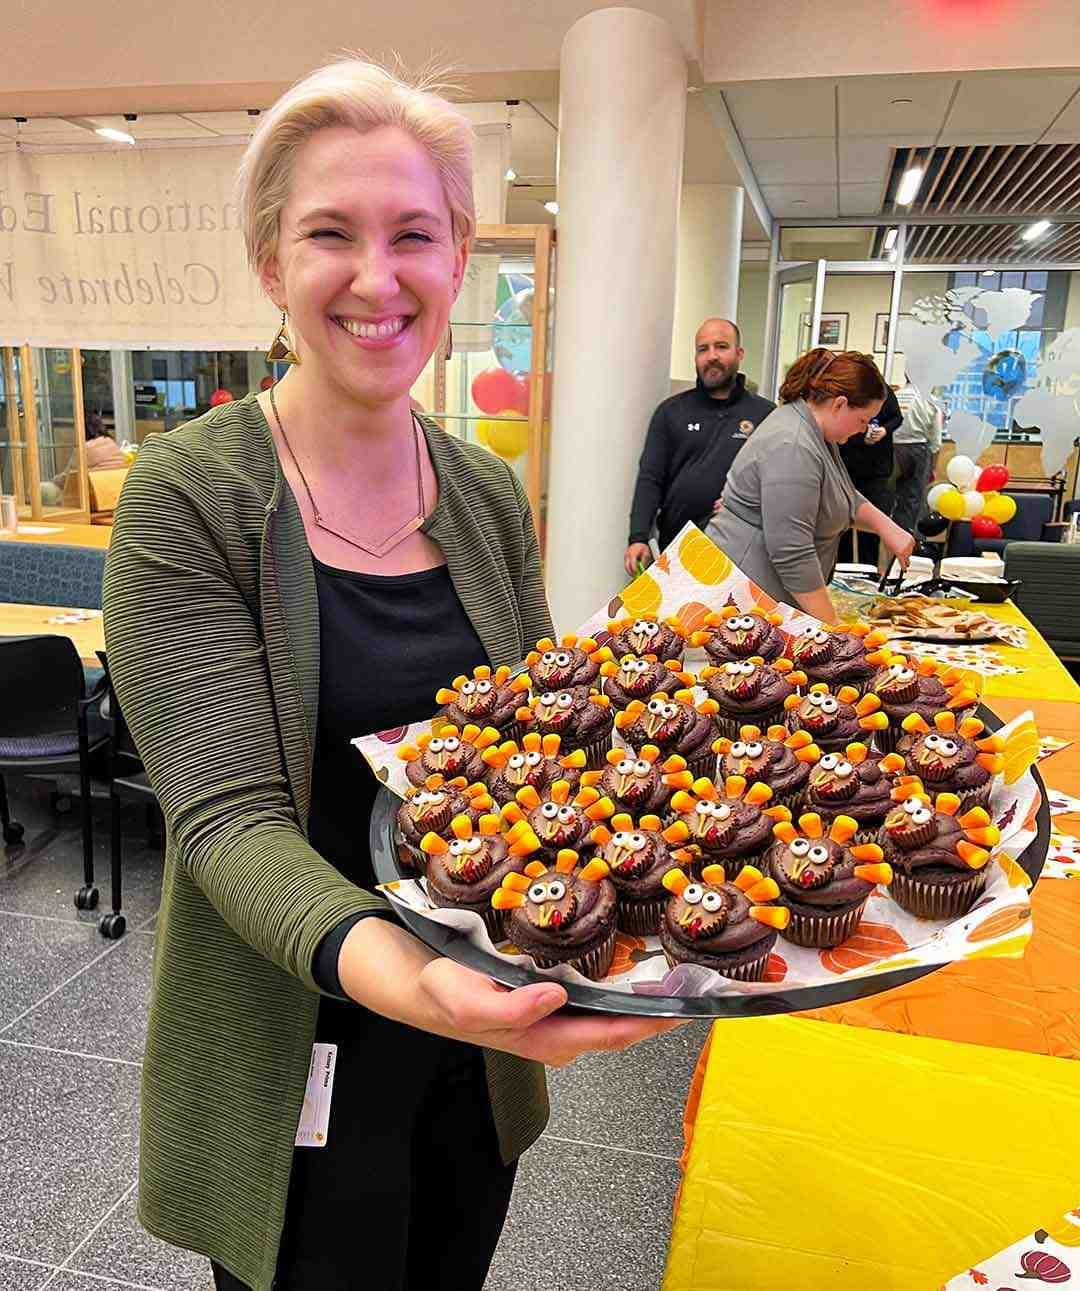 woman holds platter of cupcakes decorated like turkeys